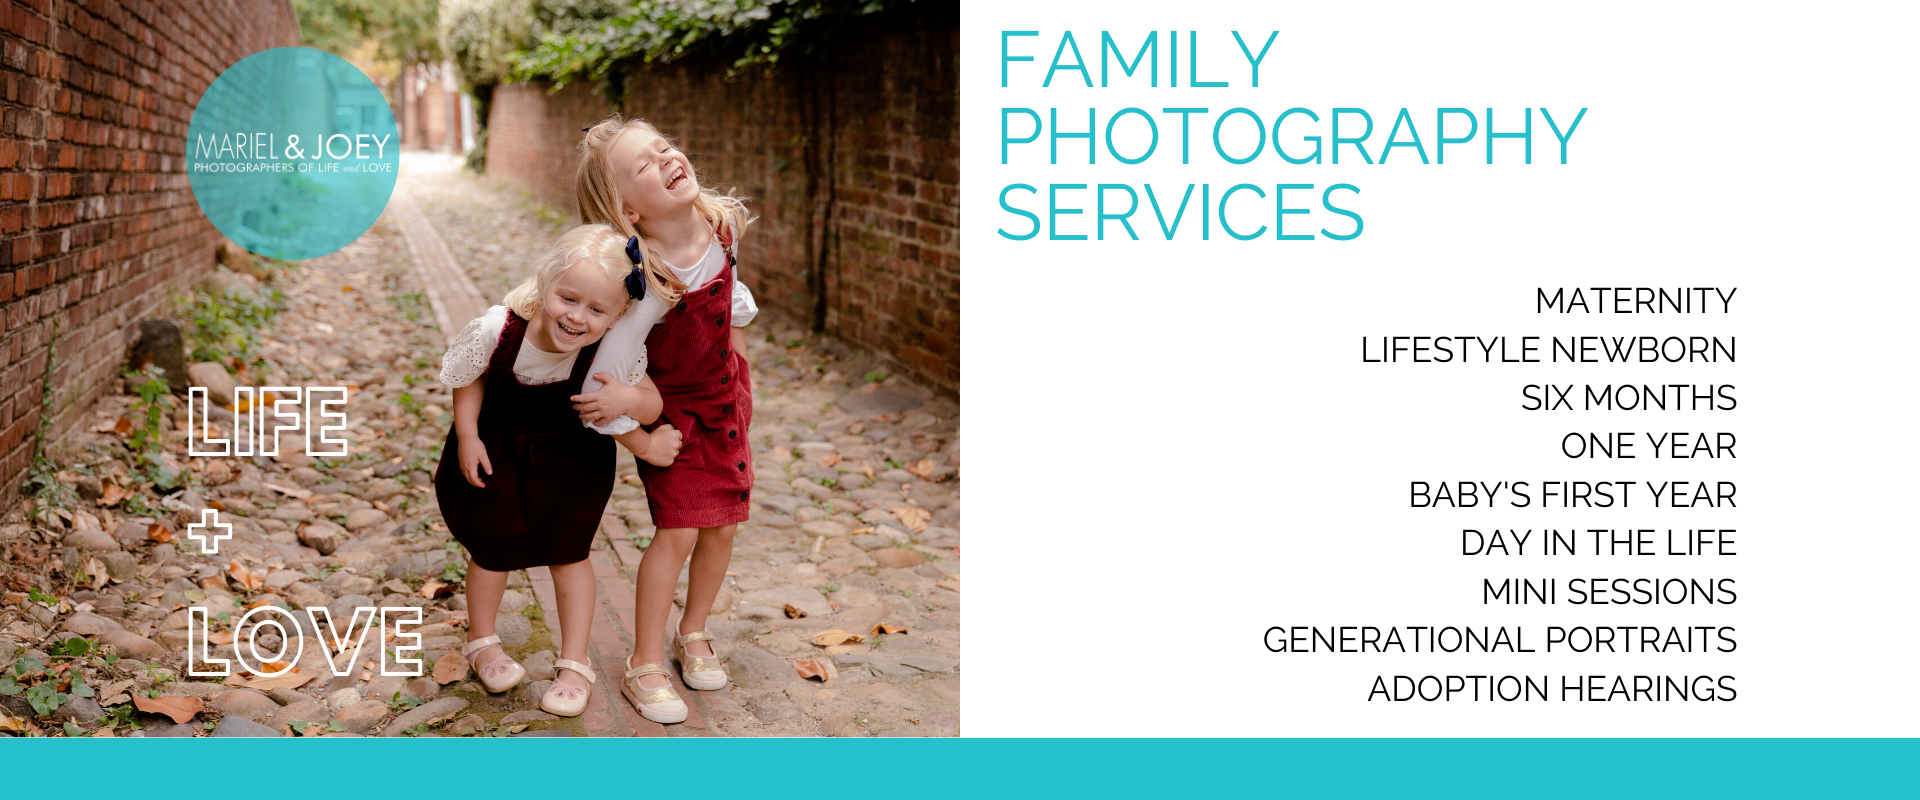 Fort Worth Family Photographer including Maternity Photography, Newborn Photography, Family Photography, and Adoption Hearing Photography.